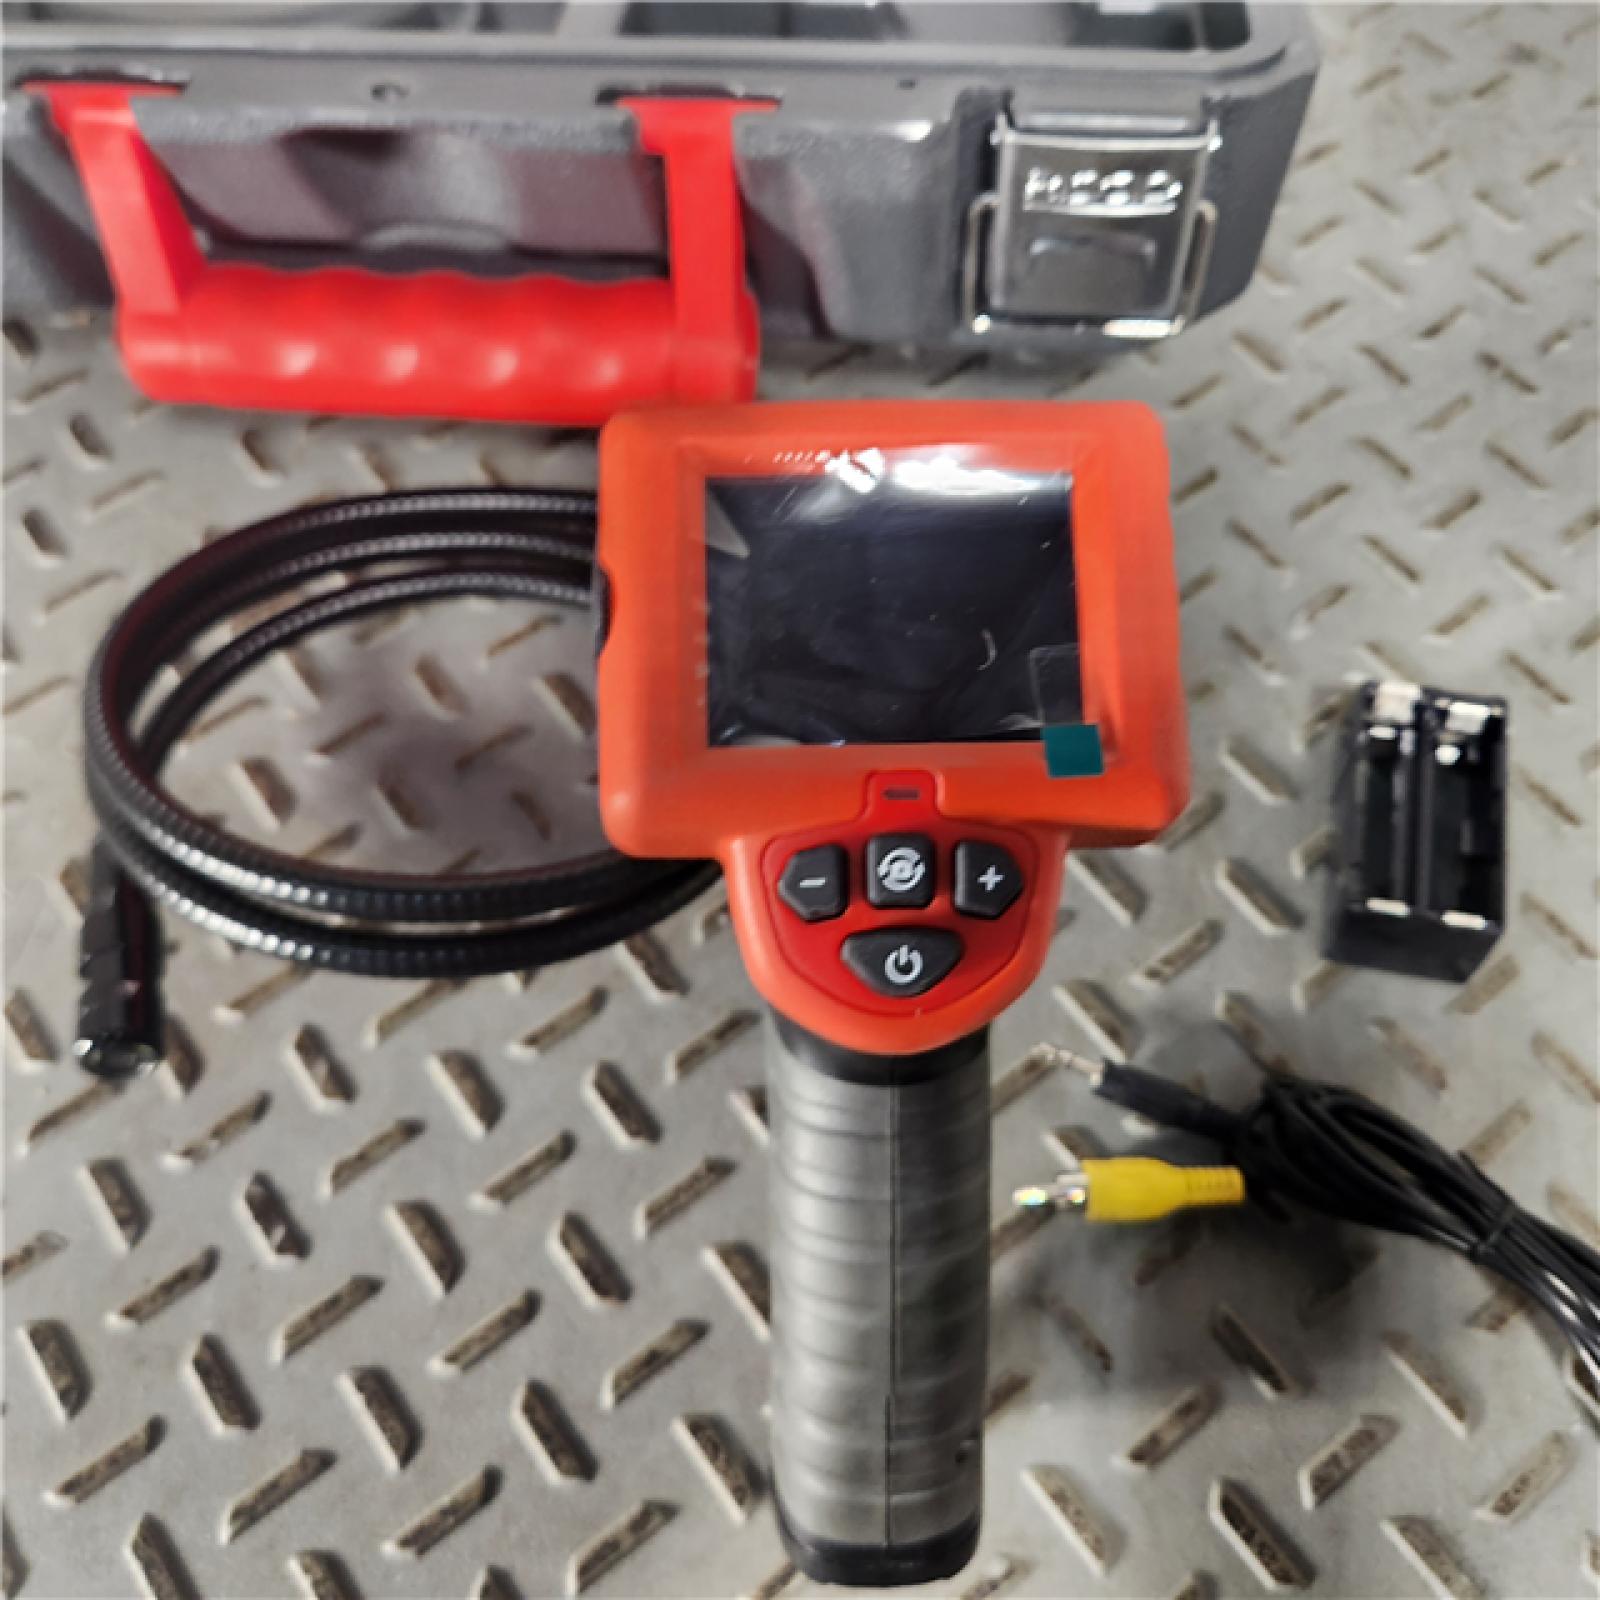 Houston Location - As-IS Ridgid 40043 Micro CA-25 Handheld Inspection Camera - Appears IN GOOD Condition